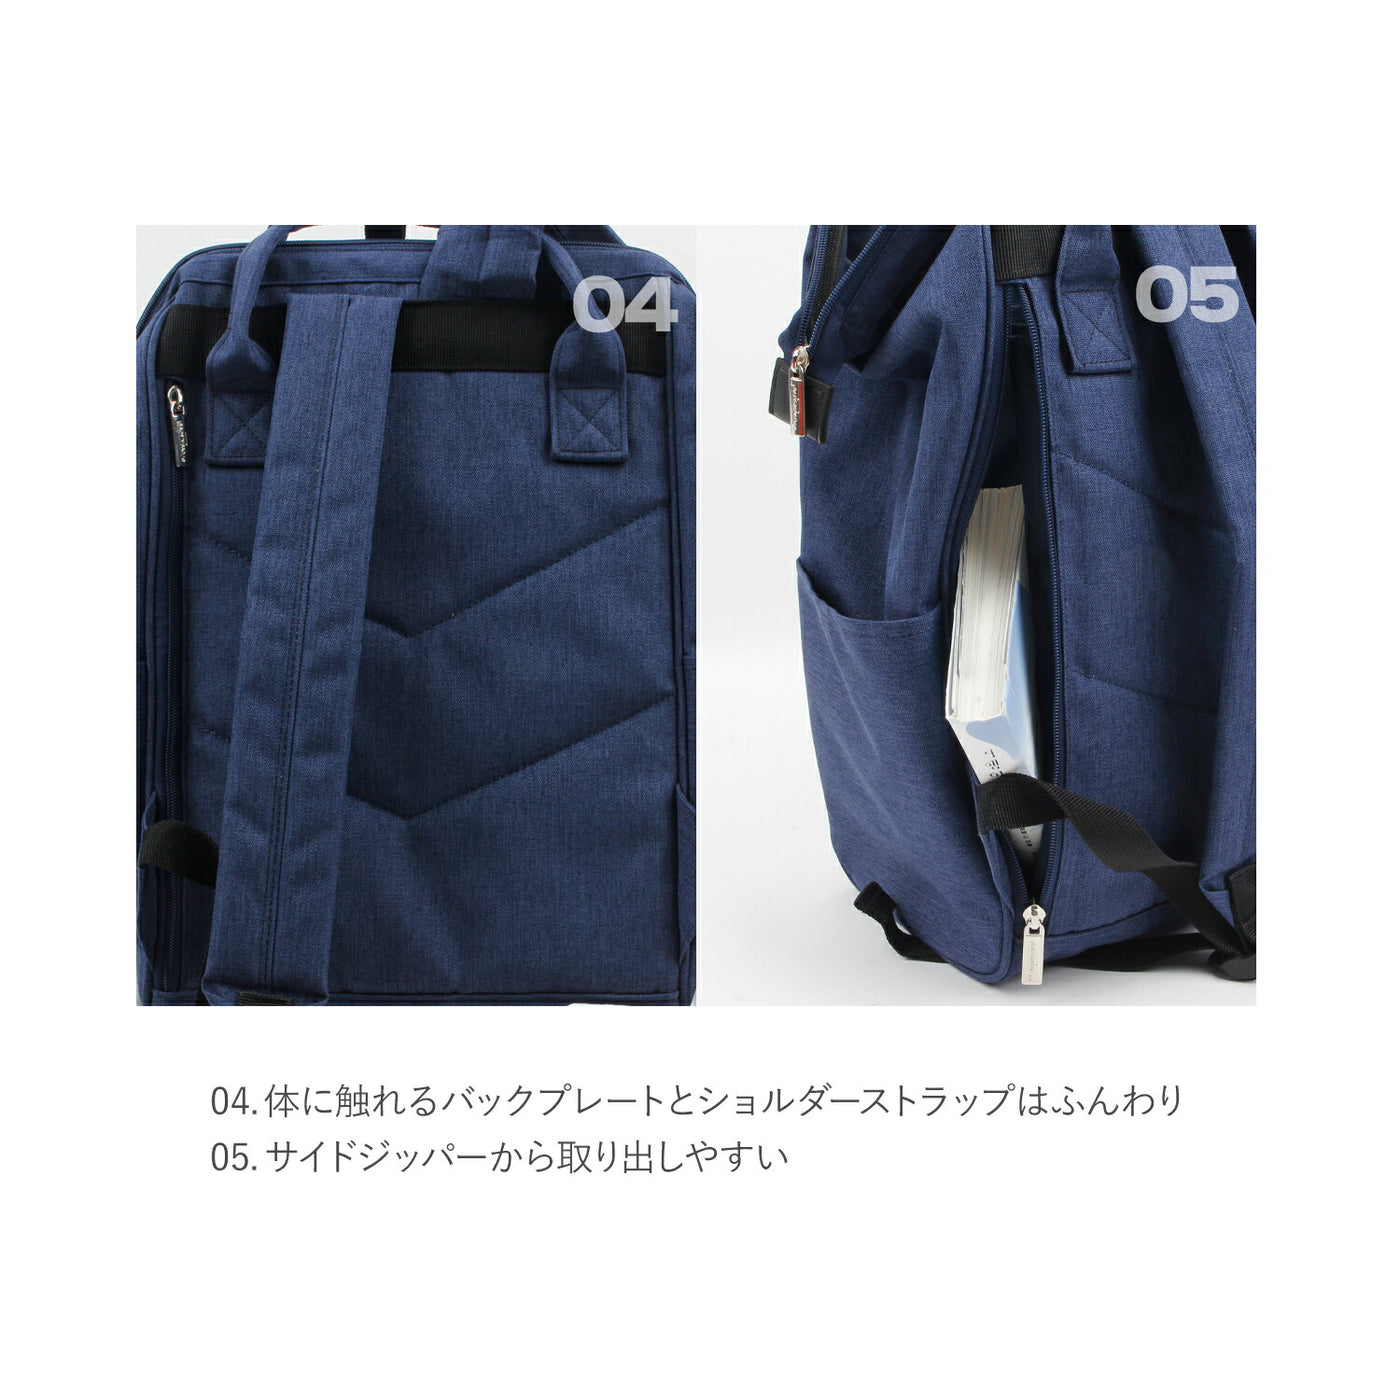 PCも入るリュックサック Daily Wire Back Pack | BAGS IN BAG（バッグインバッグ）